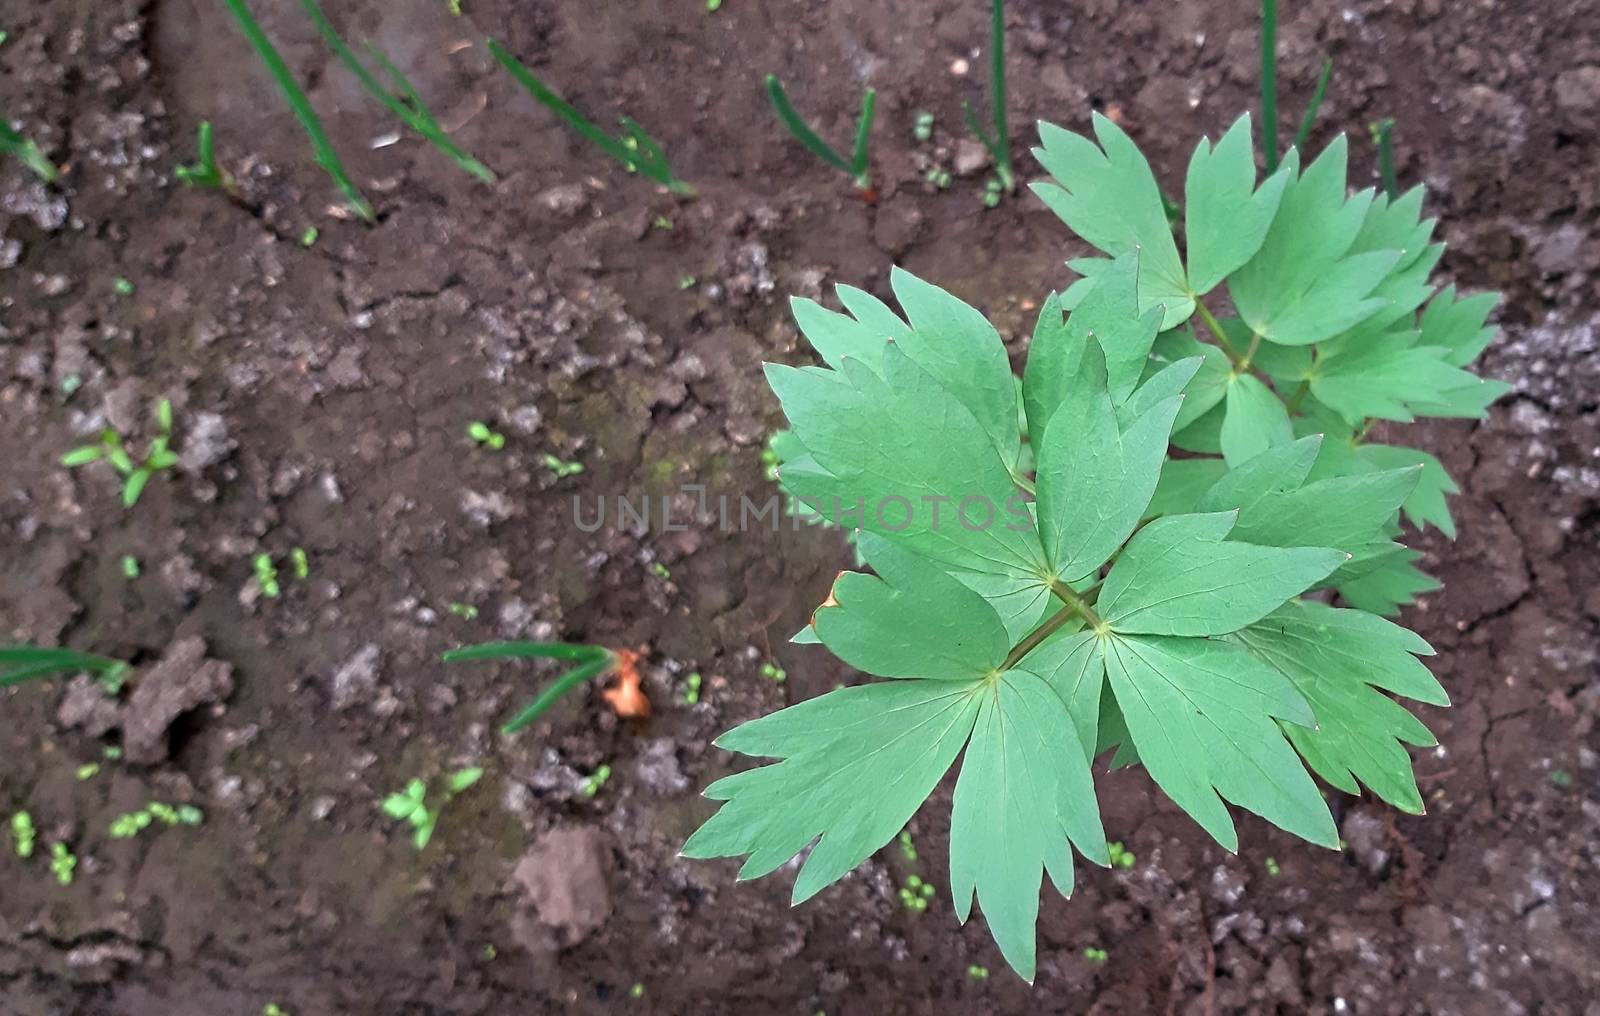 Lovage herb very medicinal plant growing in the garden by Mindru